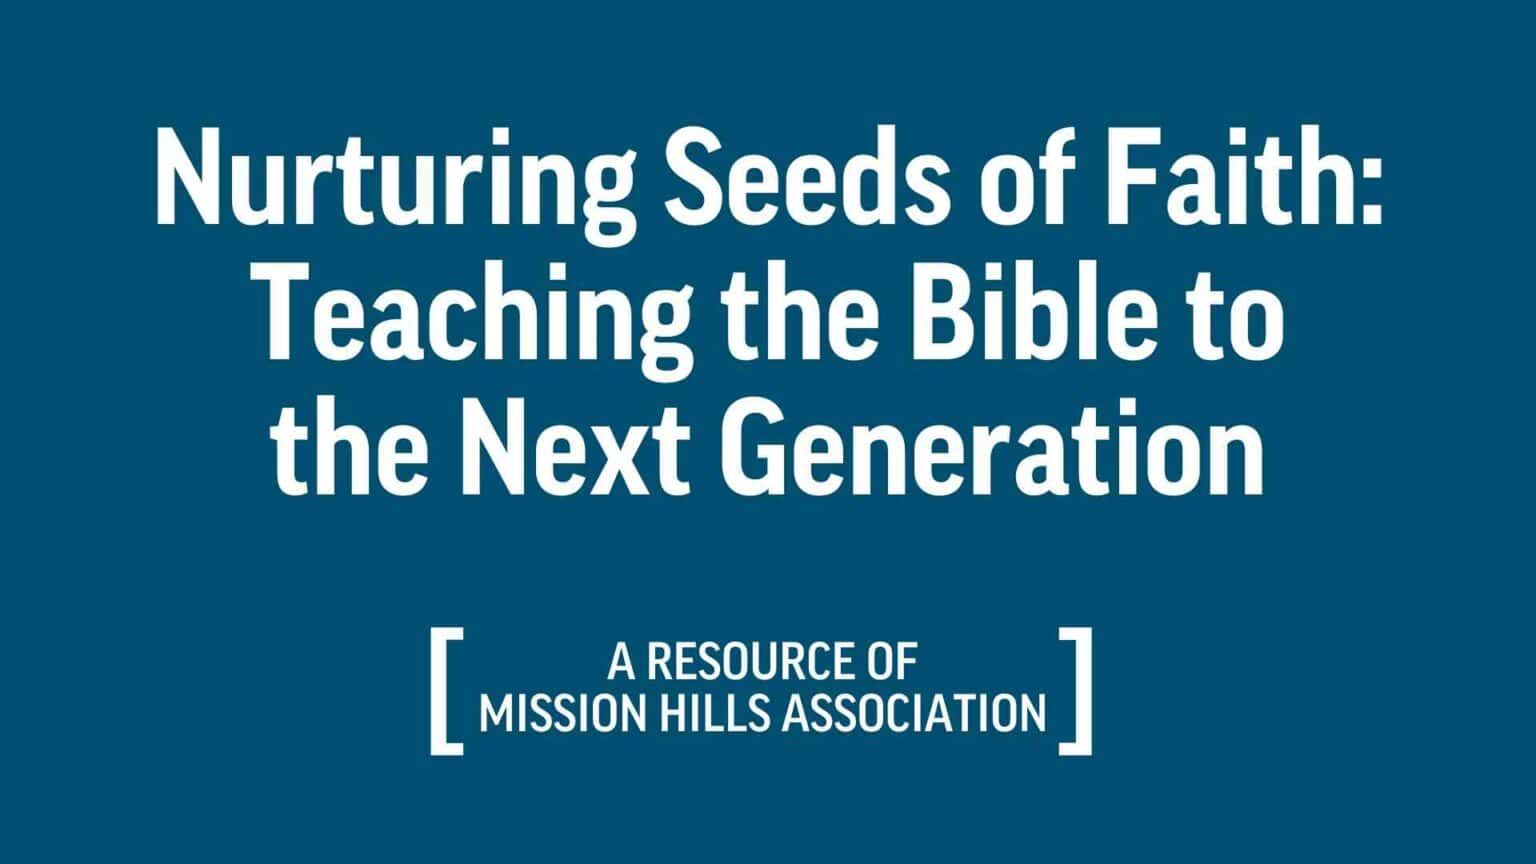 Nurturing Seeds of Faith: Teaching the Bible to the Next Generation